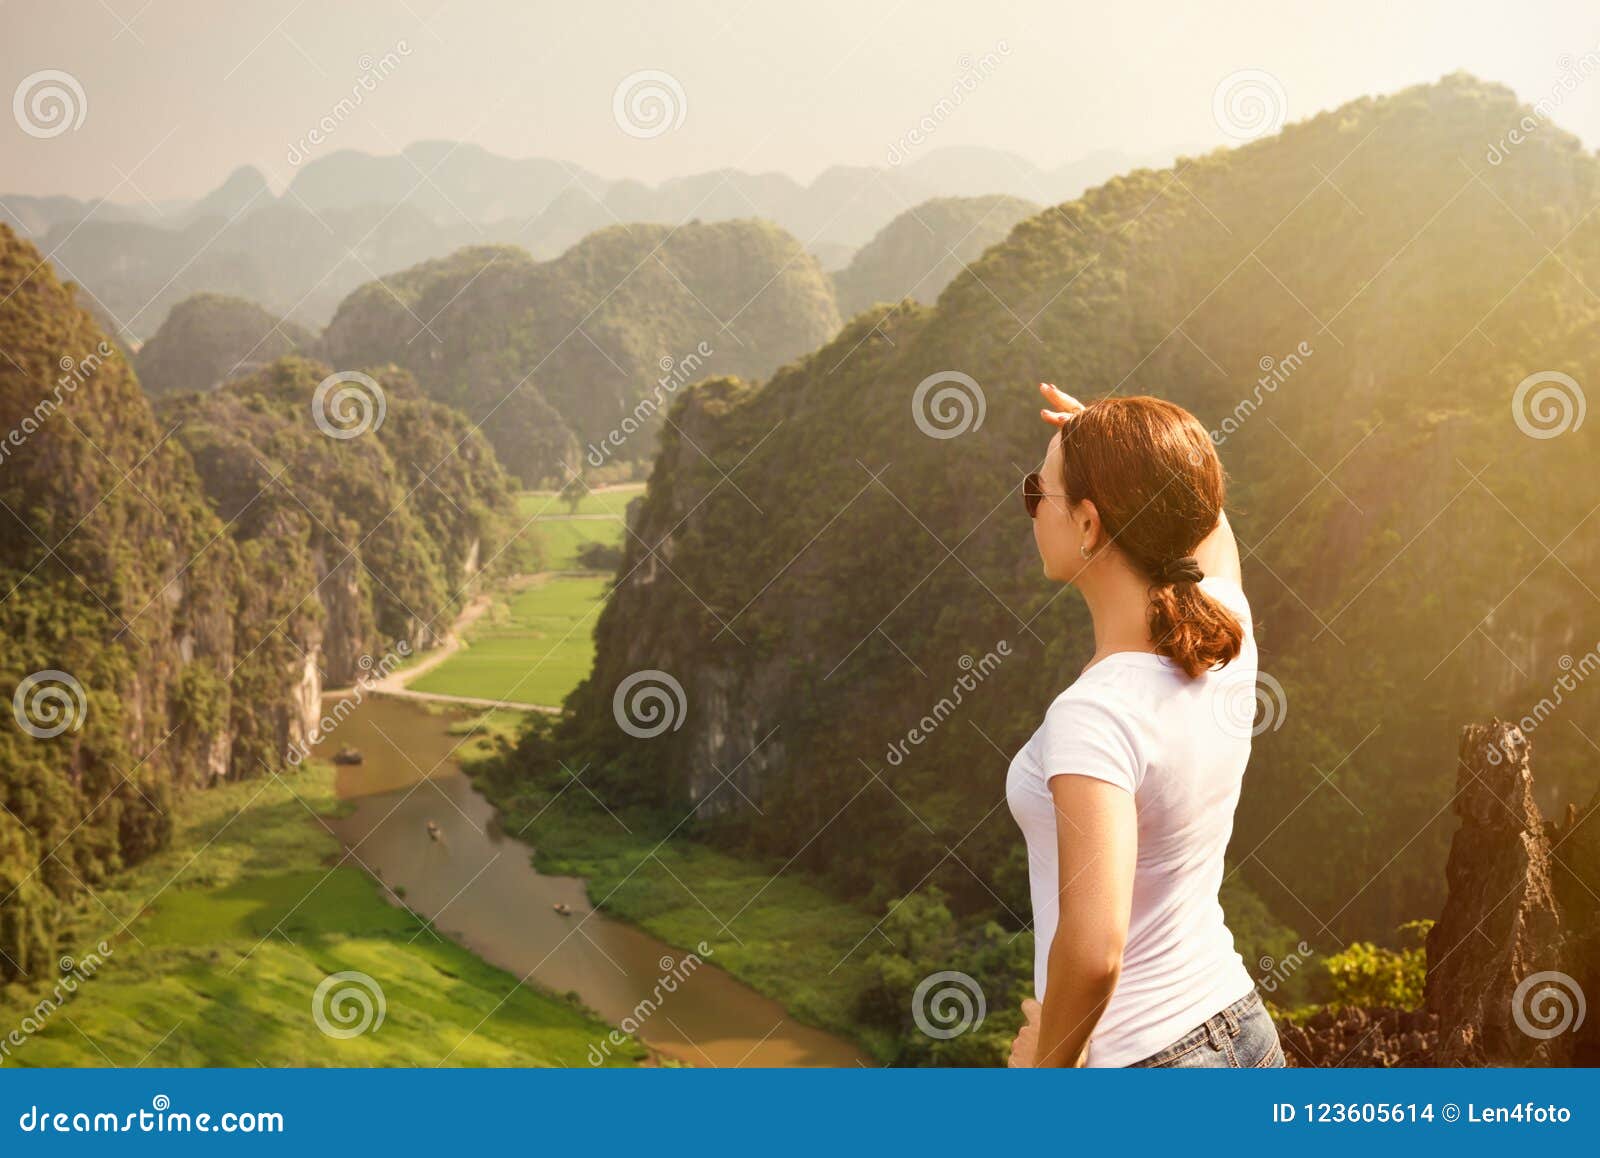 woman tourist looking far away and enjoying valley and hills view from top of a mountain